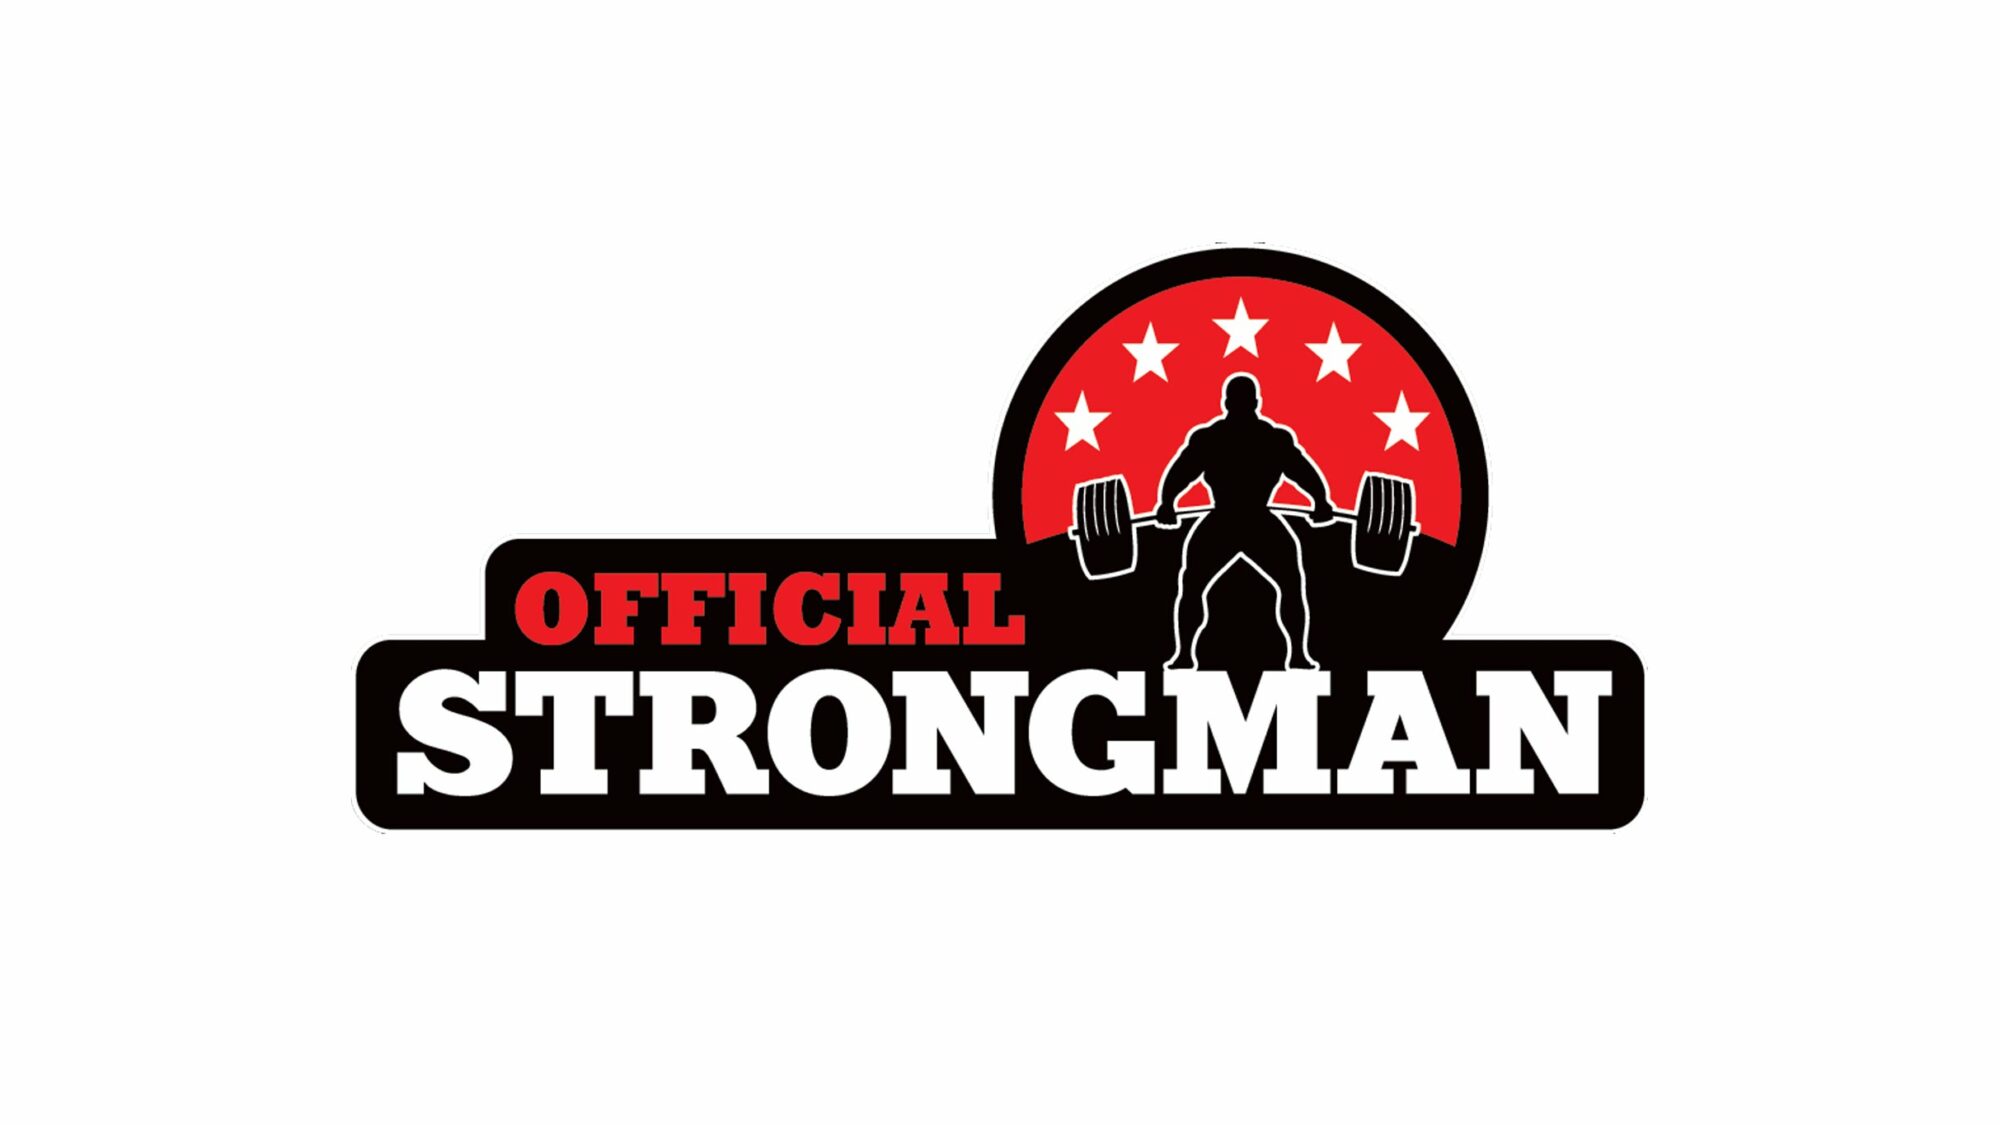 Image name Official Strongman European Championships Weekend Ticket at York Barbican York the 20 image from the post Events in Yorkshire.com.